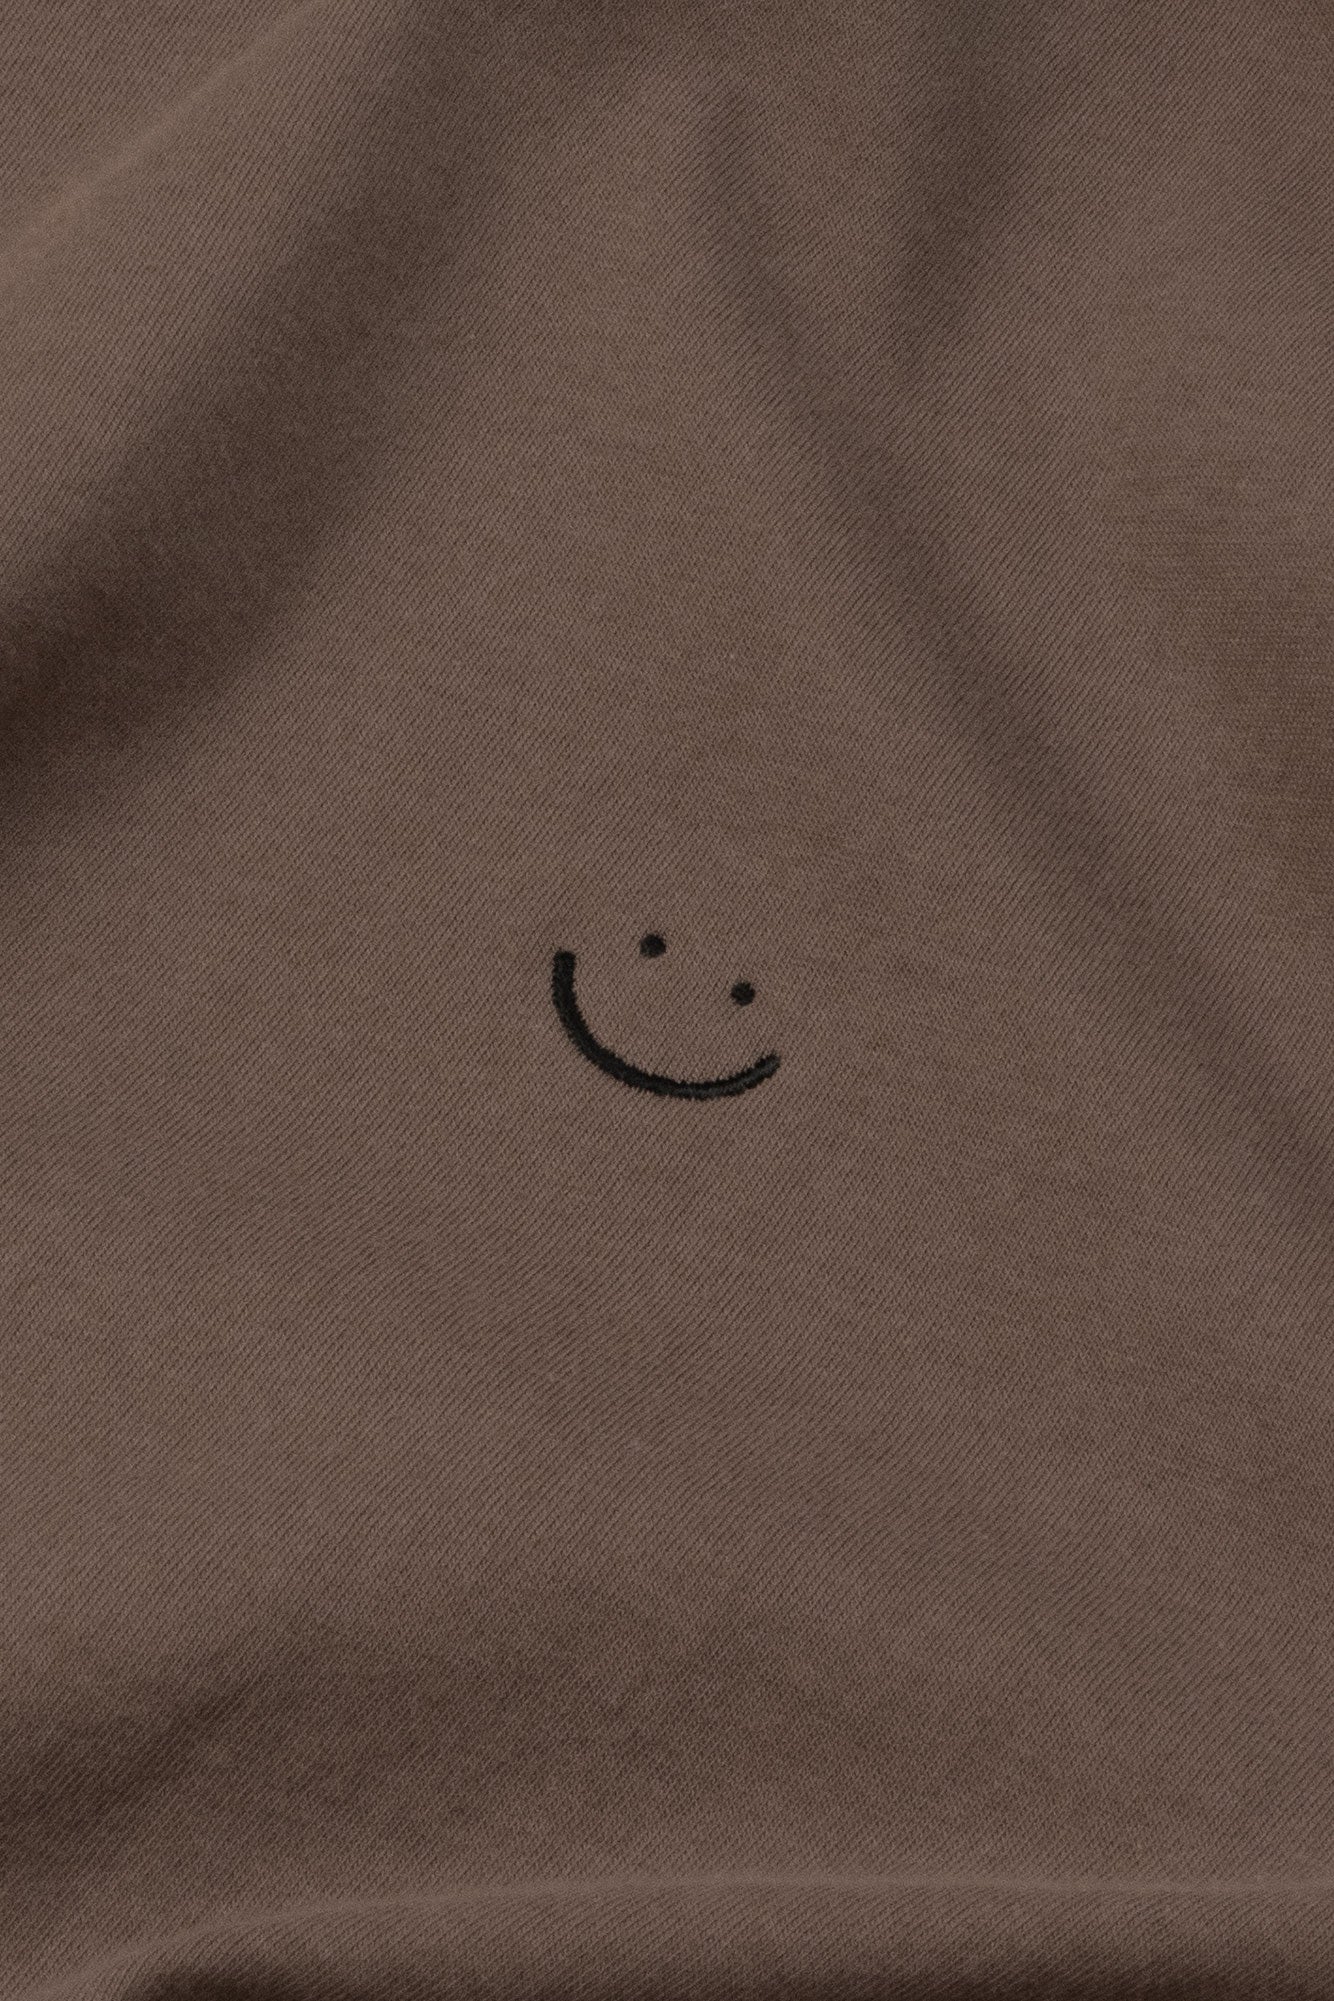 classic crew t-shirt umber smiley